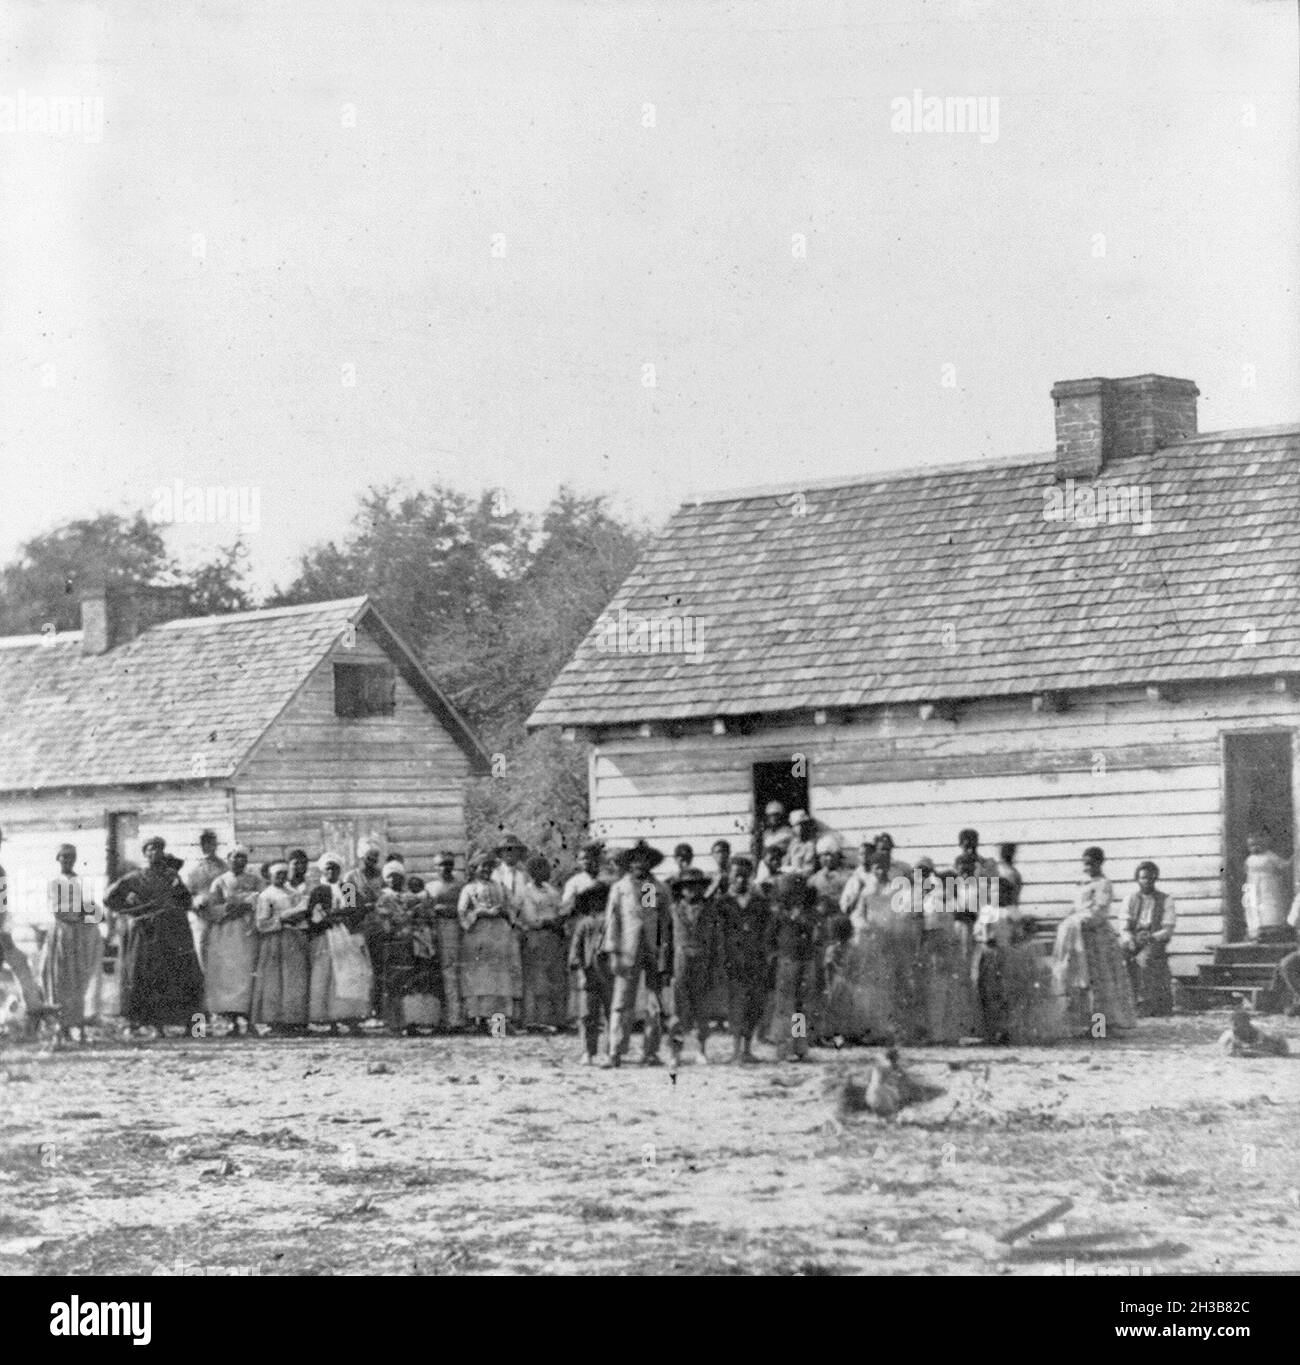 Vintage photograph circa 1862 during the confederacy era showing African American men women and children slaves on a southern plantation Stock Photo